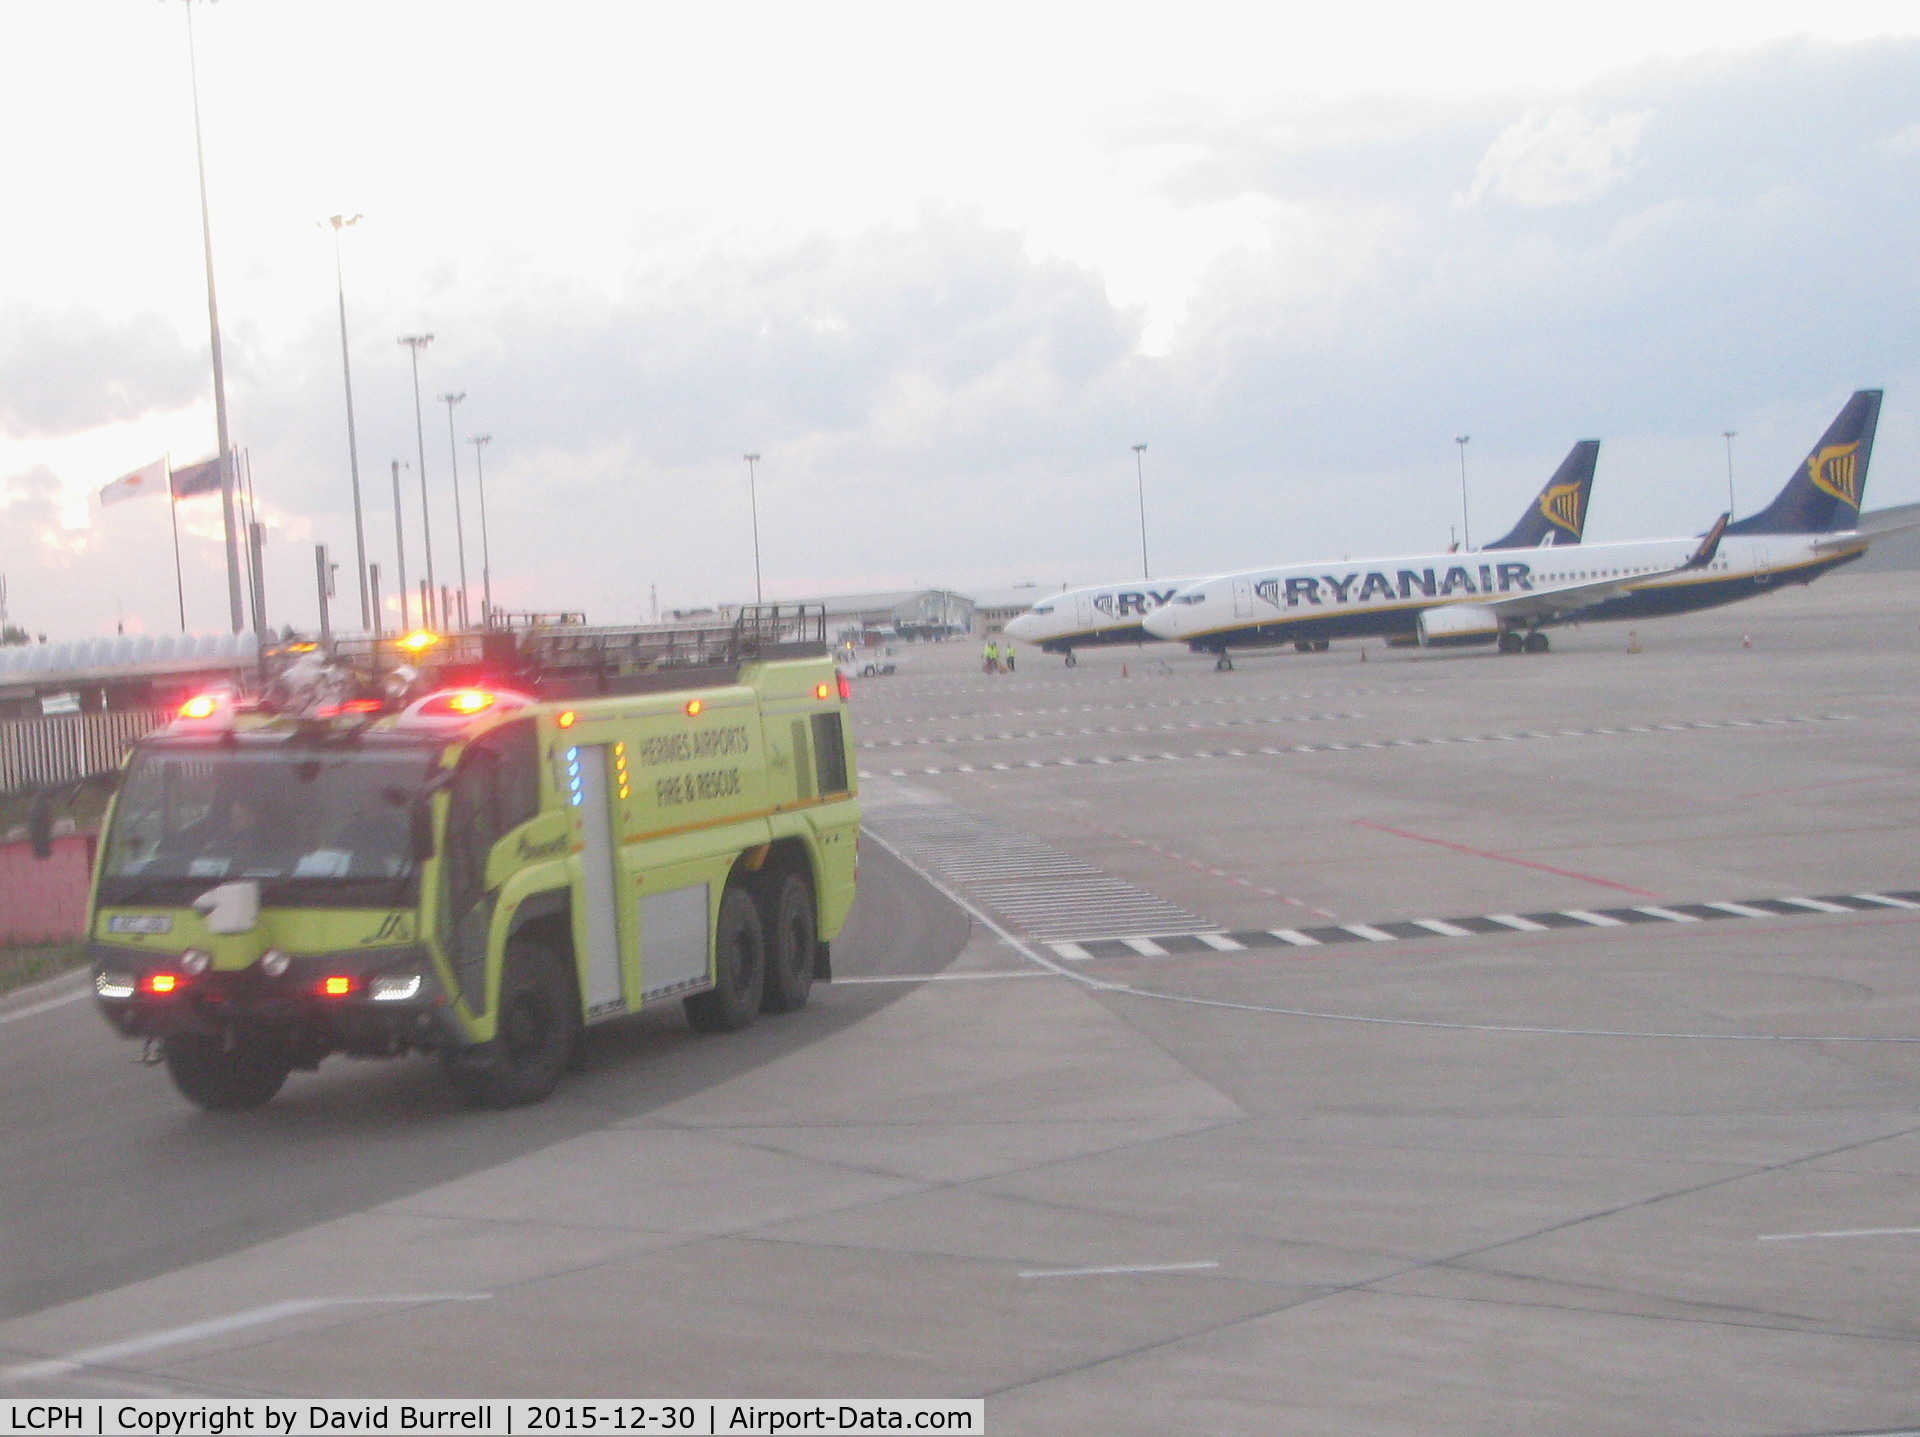 Paphos International Airport, Paphos Cyprus (LCPH) - Hermes Airport Fire and Rescue Vehicle @ Paphos Airport, Cyprus.